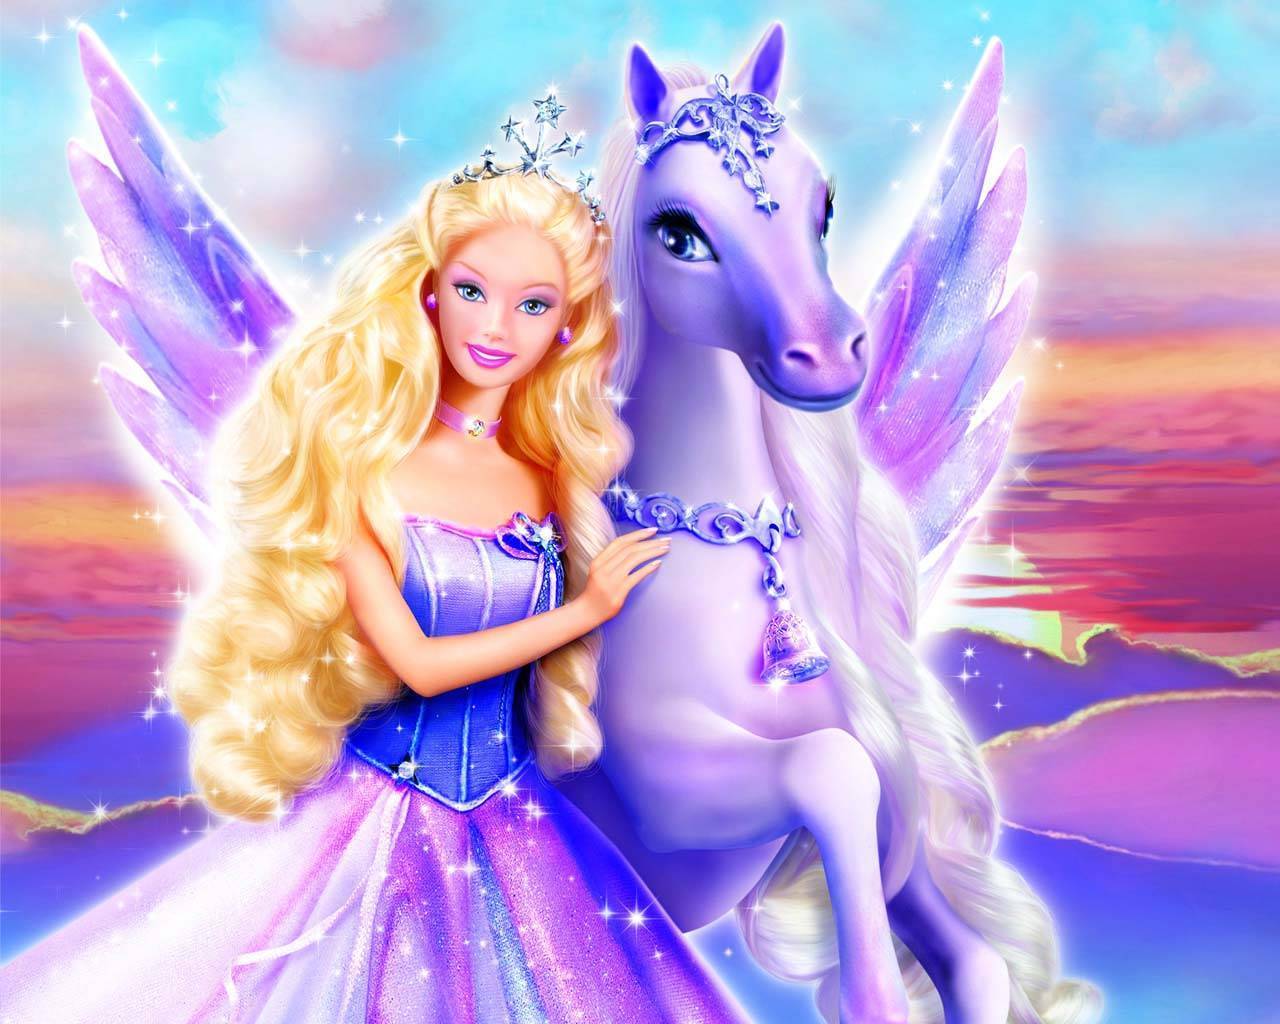 Share more than 59 disney princess wallpaper for iphone latest   incdgdbentre